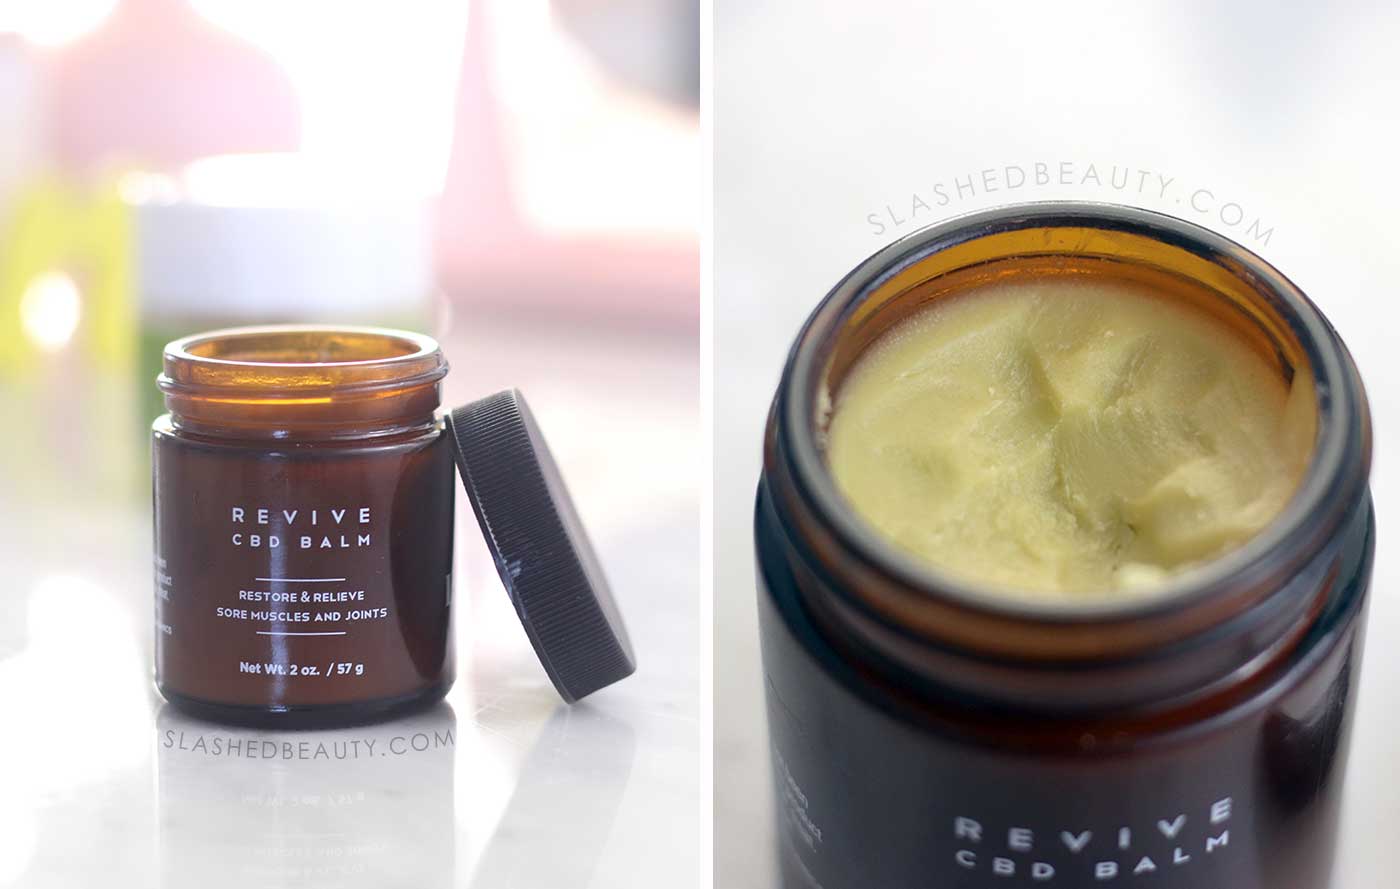 LEEF Organics Revive CBD Balm Review | 4 Must-Have CBD Products that I Can't Live Without | Slashed Beauty